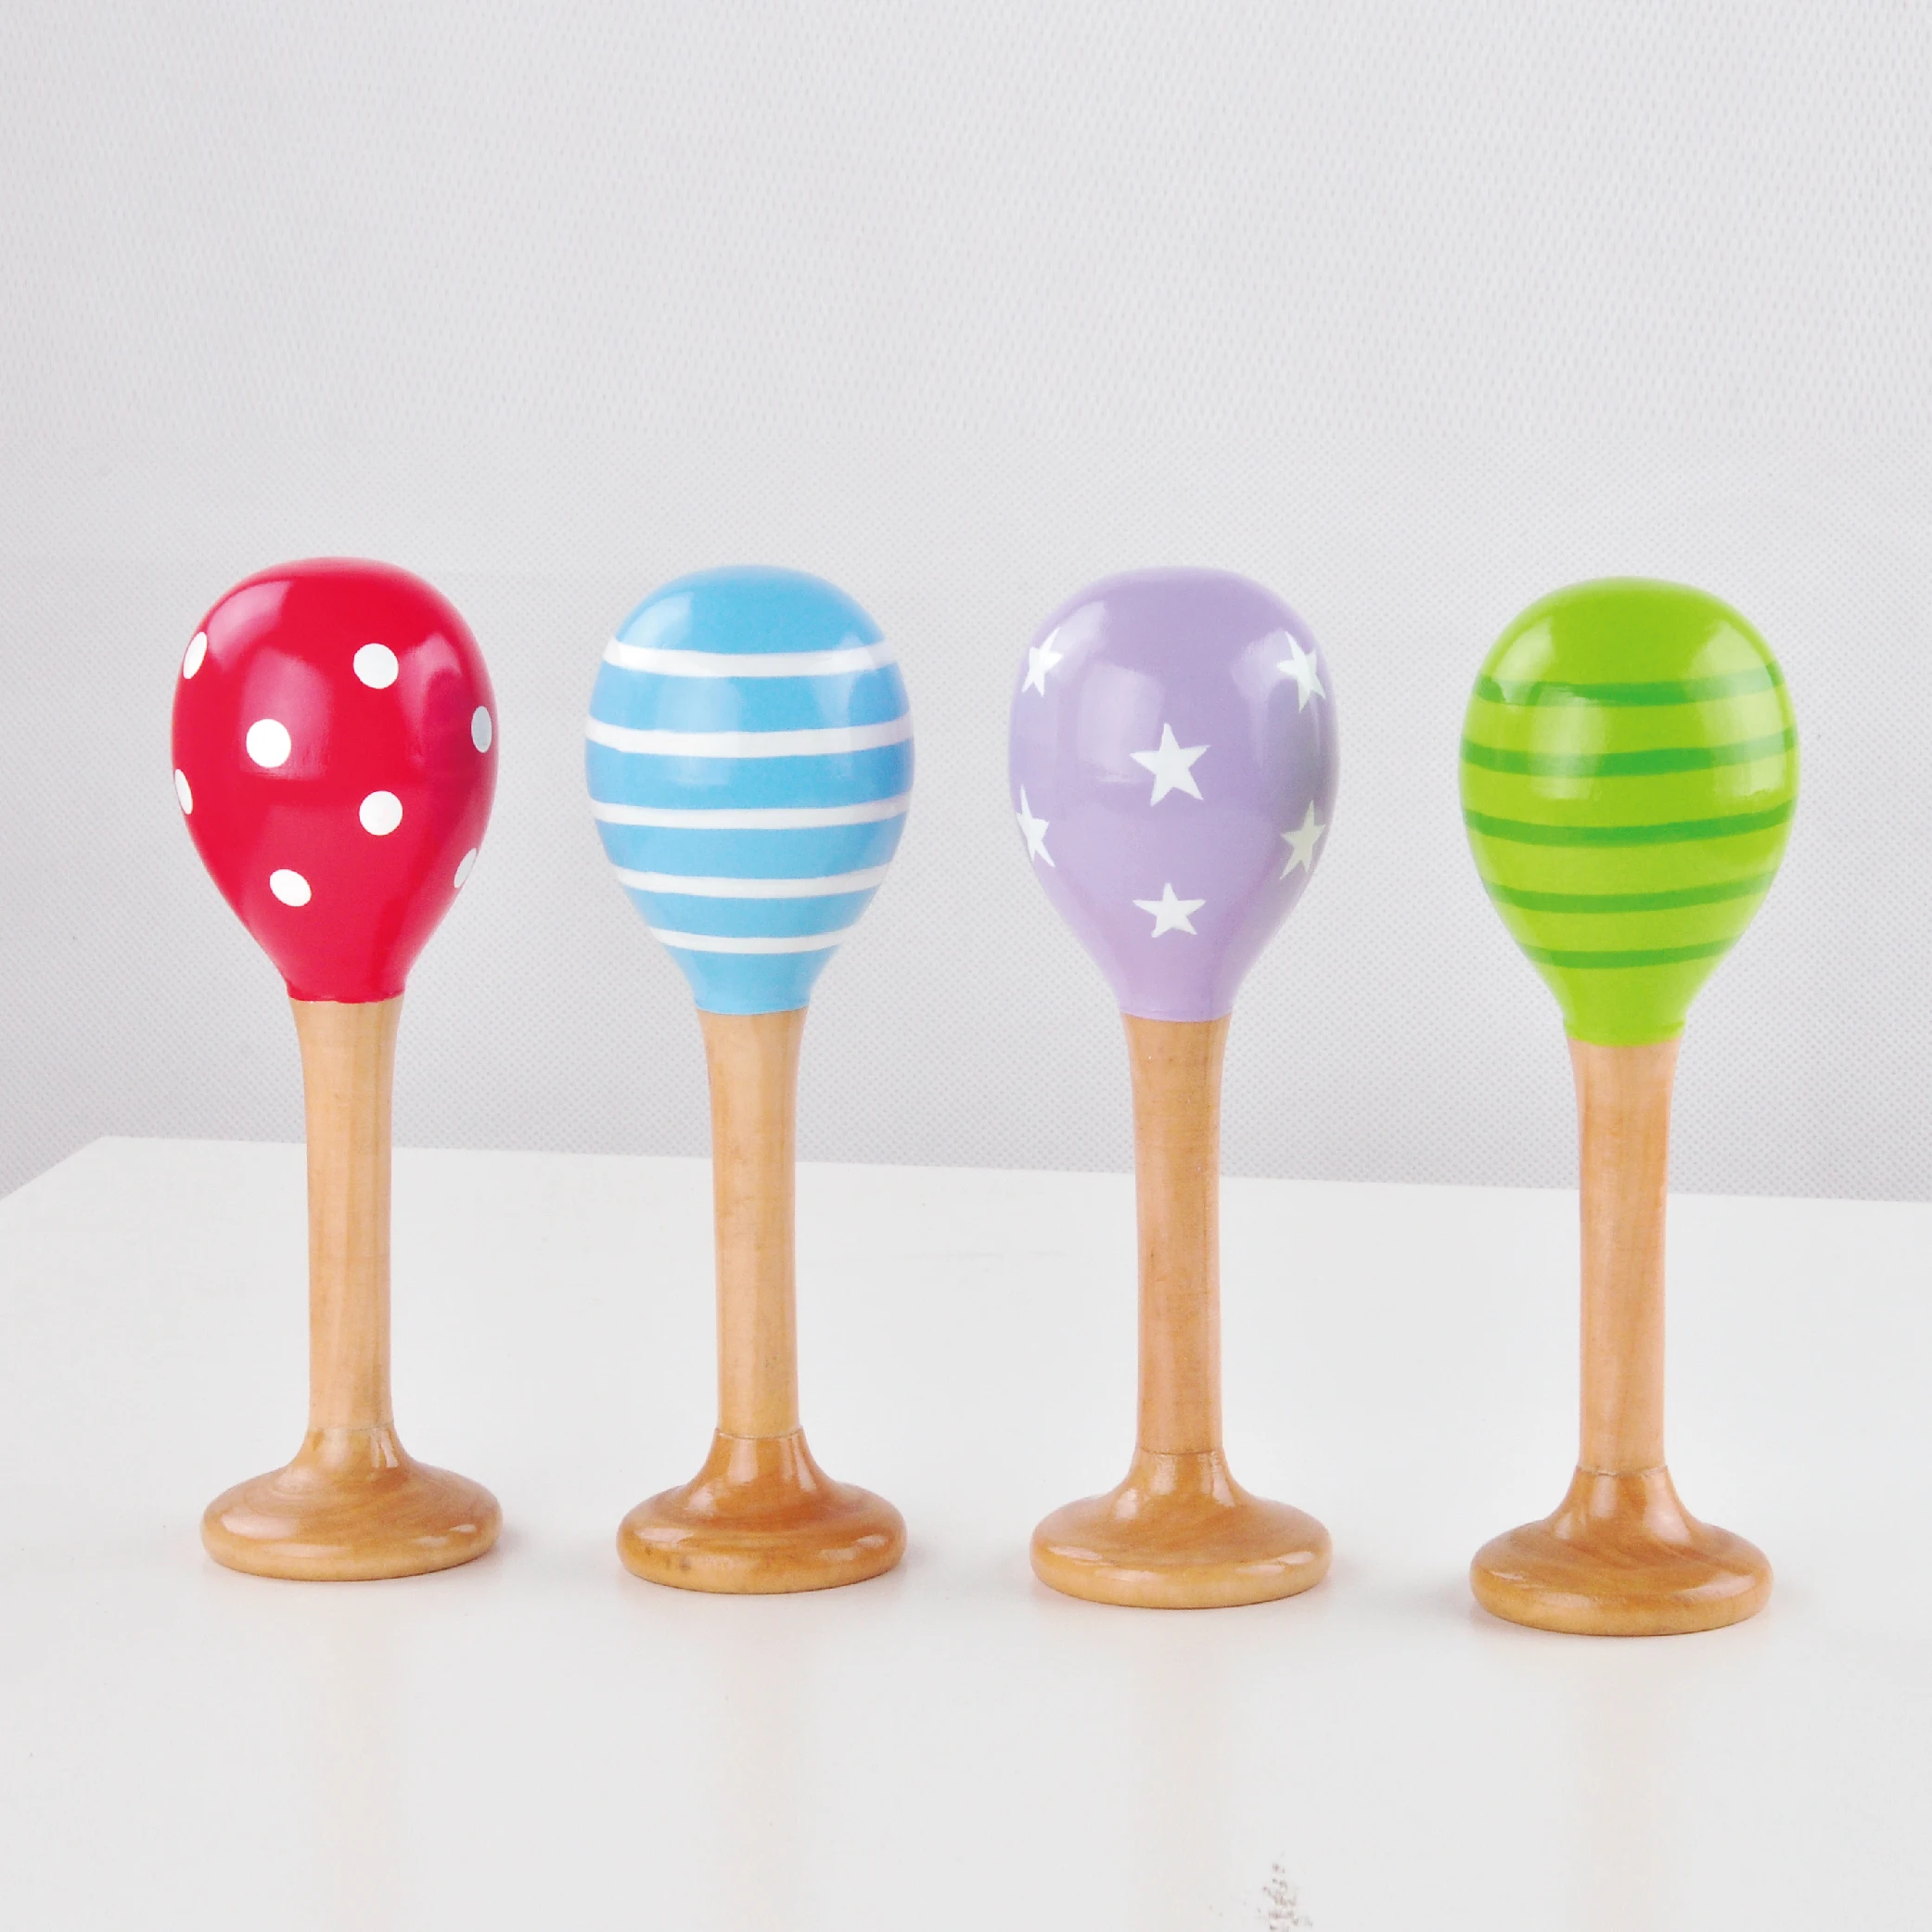 Children colorful musical instruments mini music maraca toy wooden maracas for kids